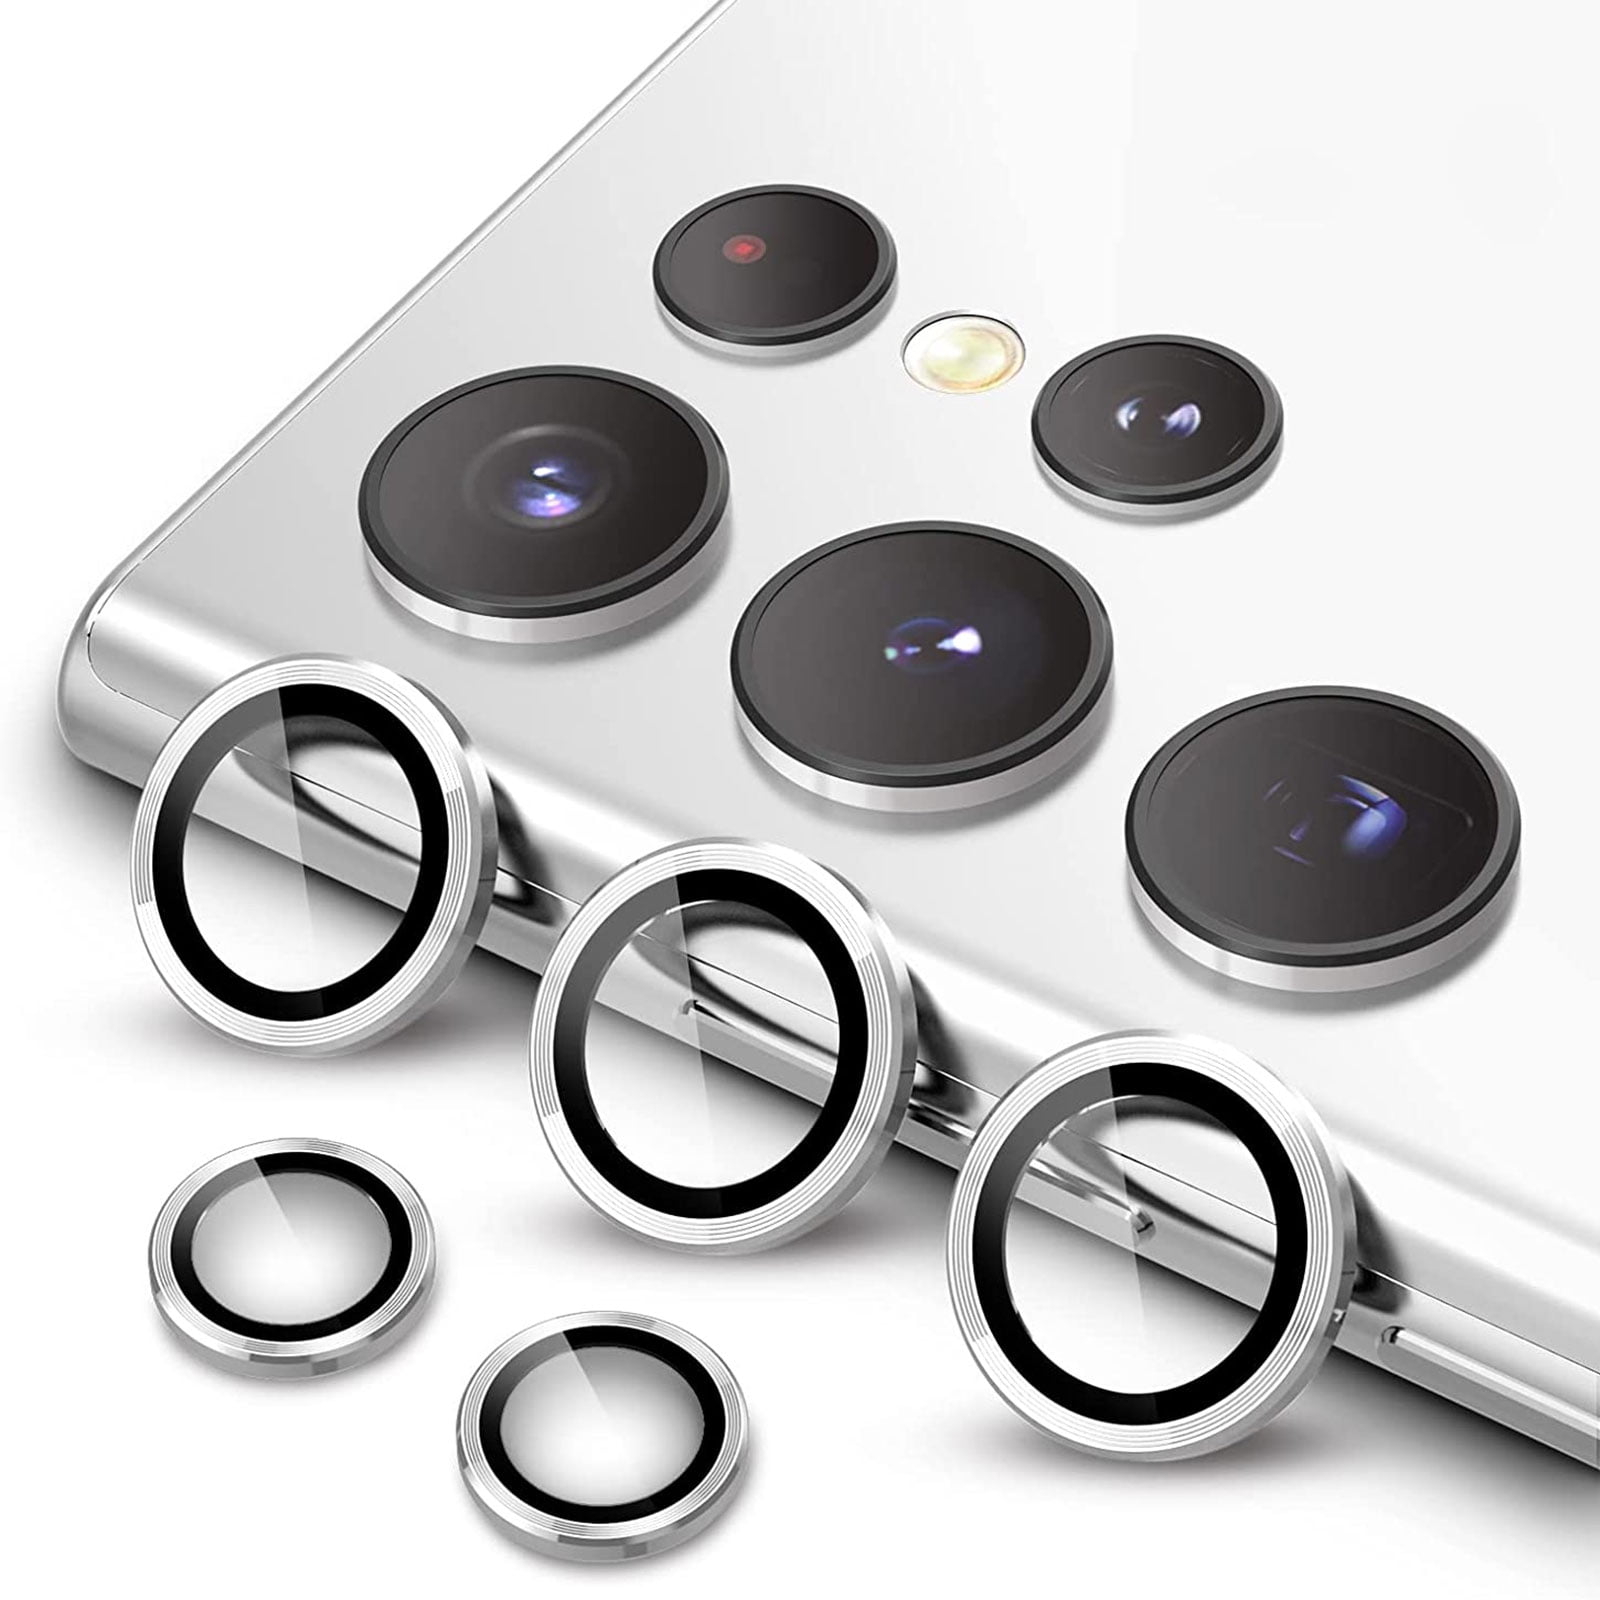 Ringke Camera Lens Frame Glass Compatible with Samsung Galaxy S23 and Galaxy S23 Plus 5G, Aluminum Metal Individual Camera Lens Protector Cover